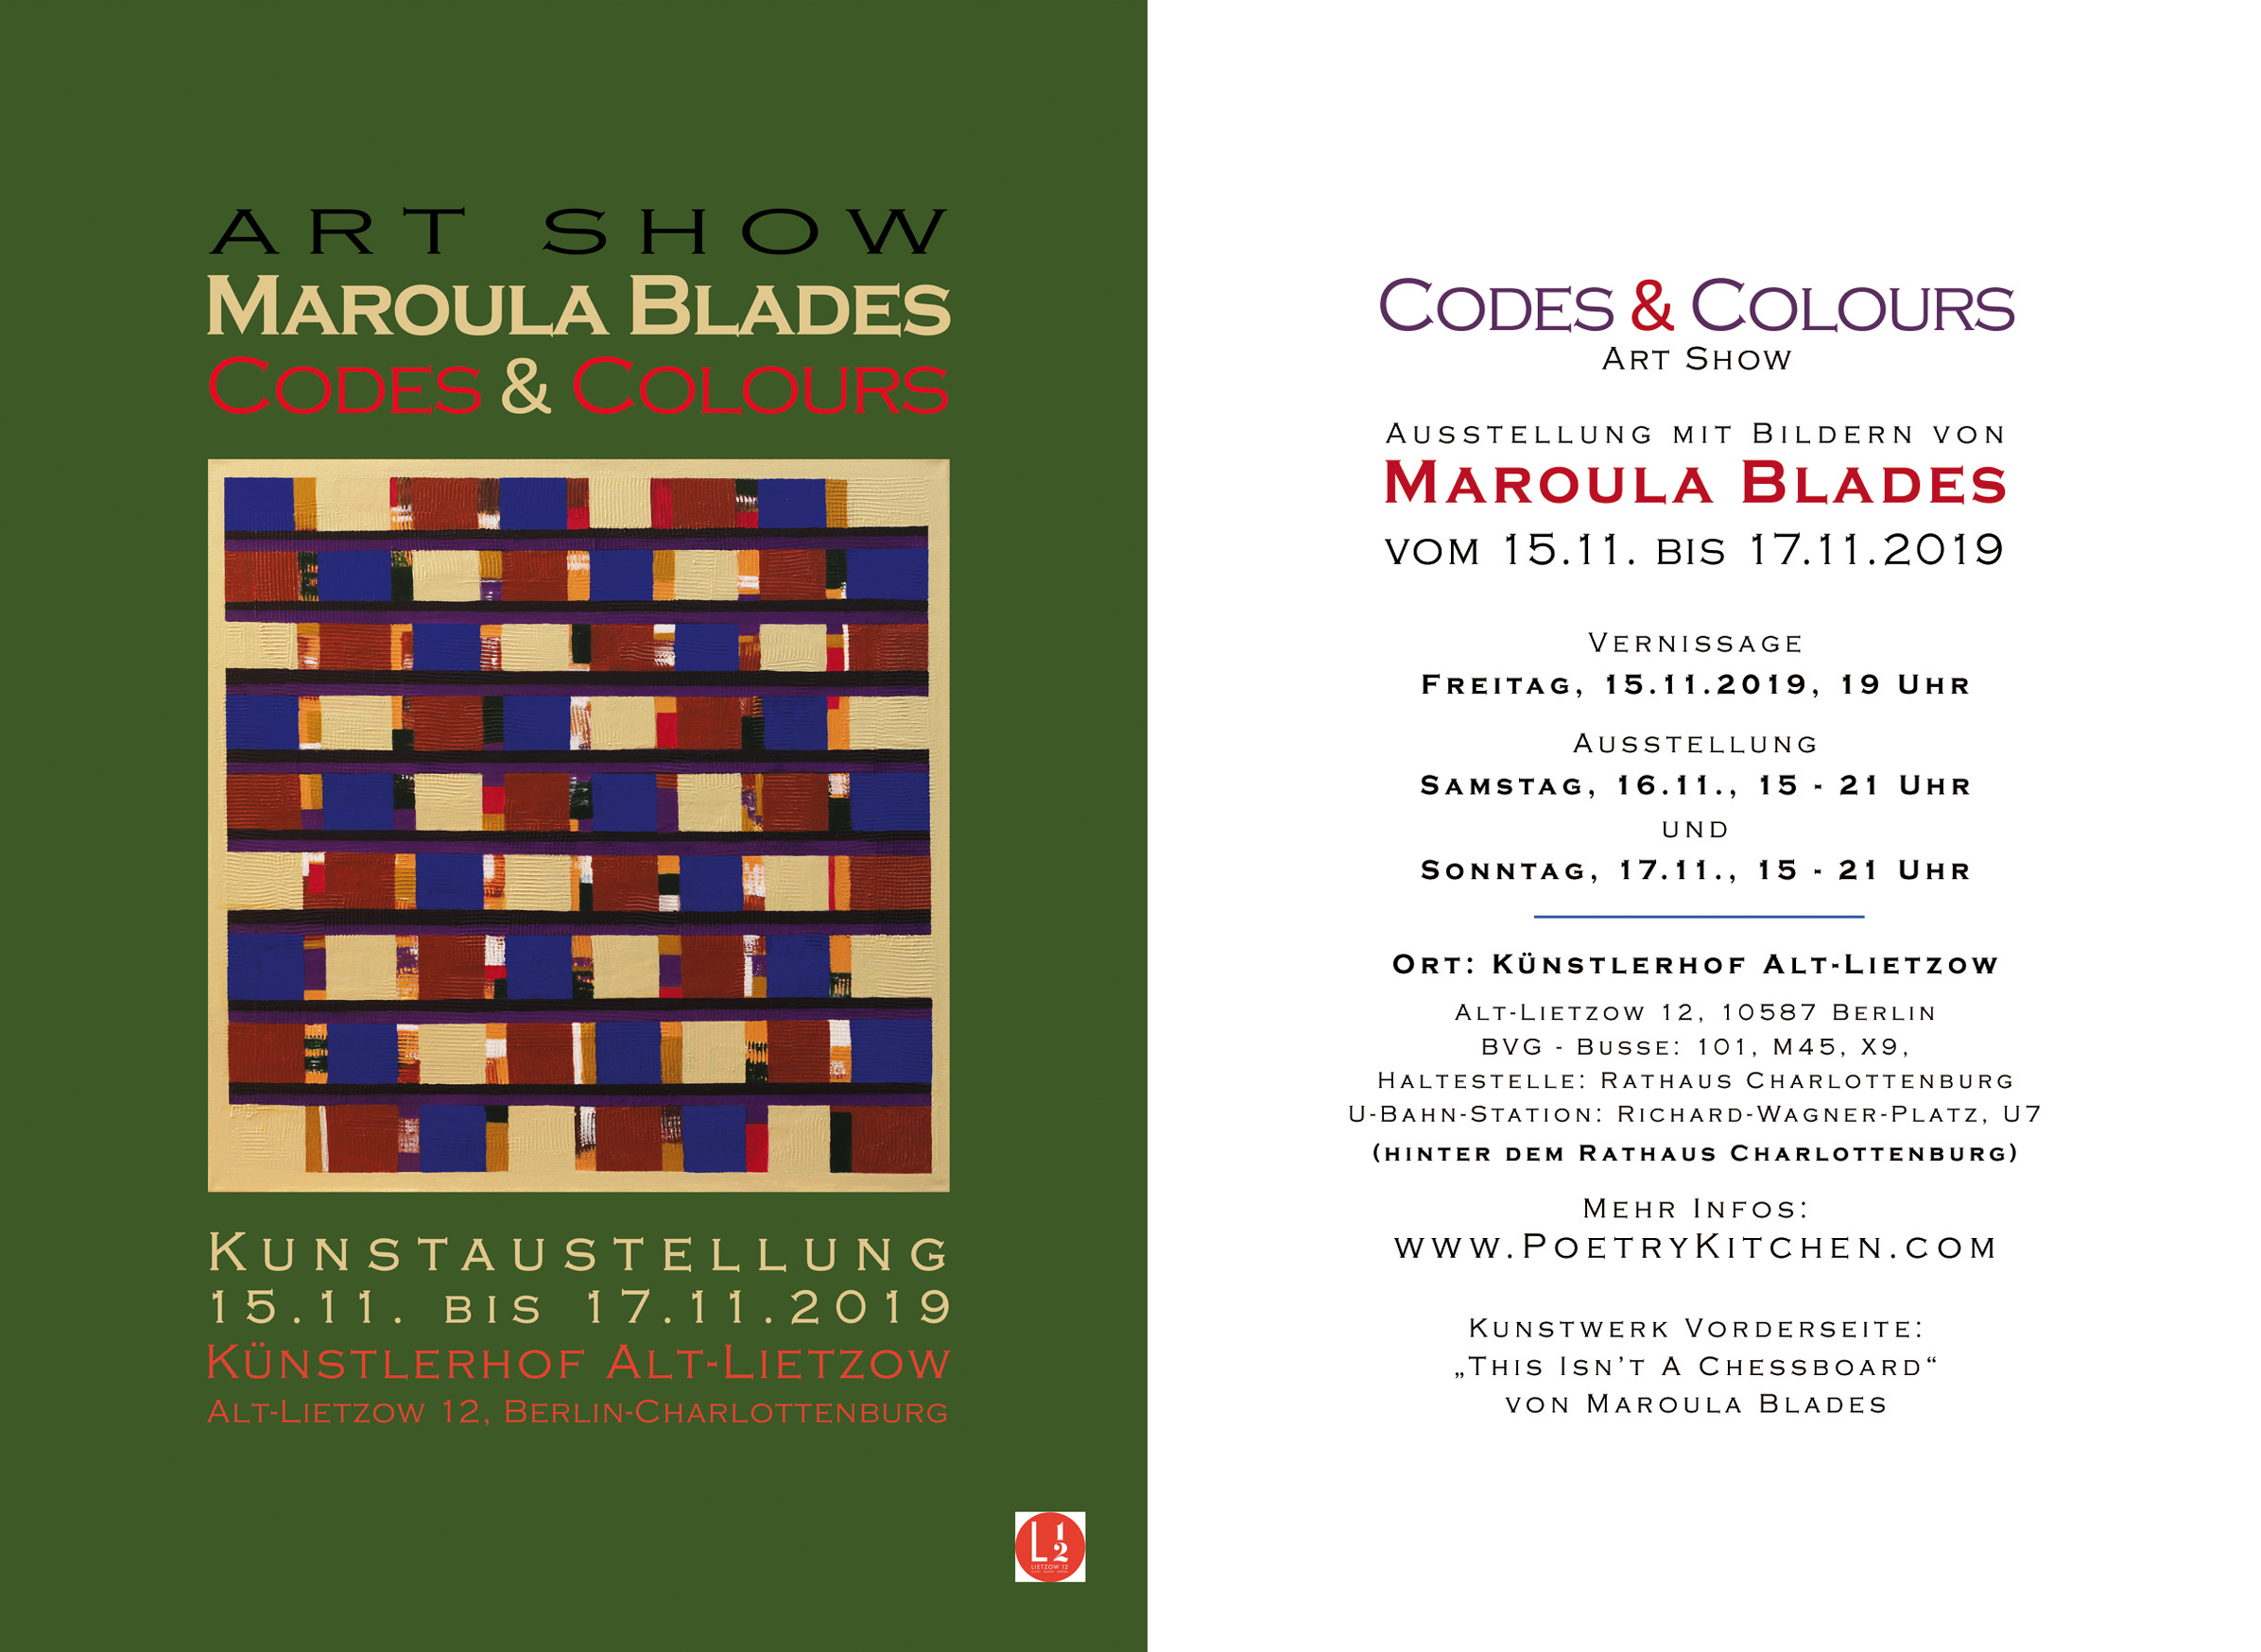 email flyer - Maroula Blades - CODES & COLOURS